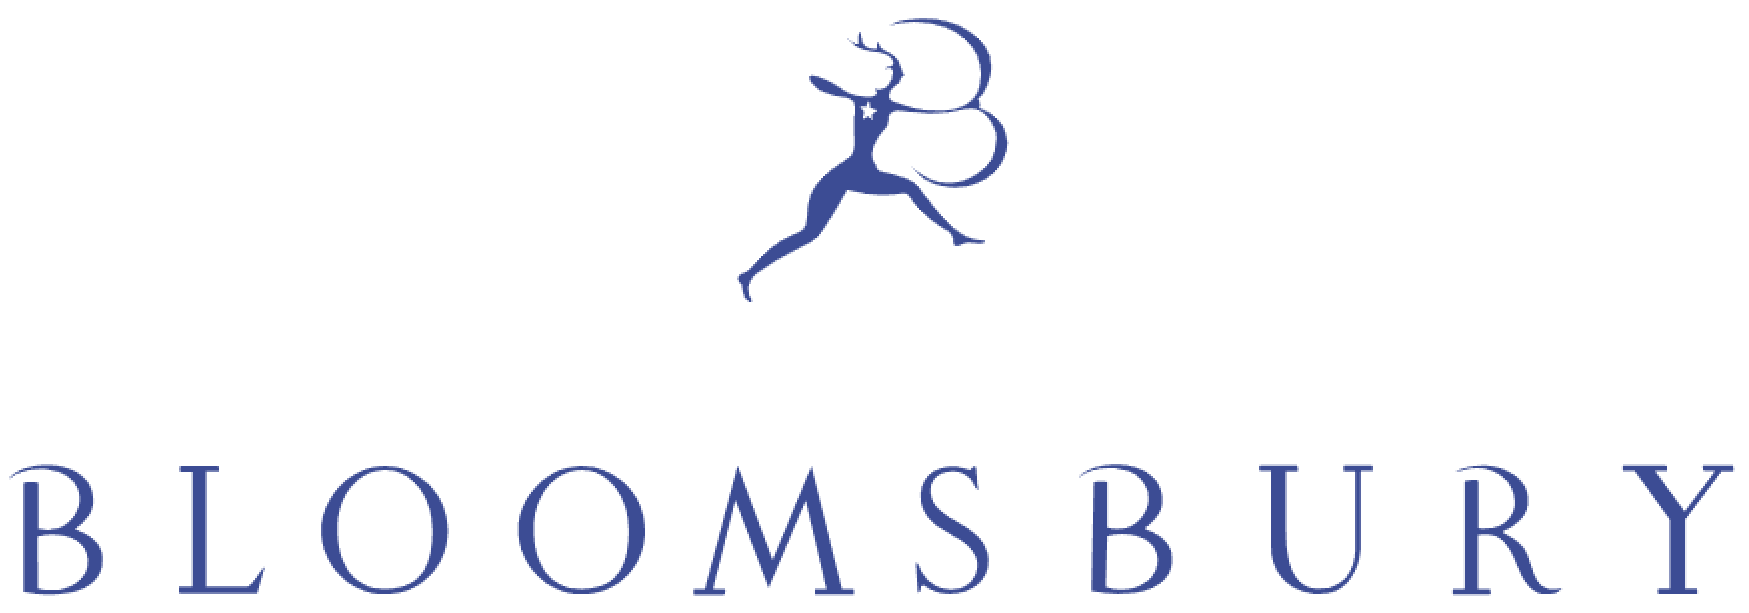 Bloomsbury Publishing in navy blue capital letters, then a person symbol above playing the harp